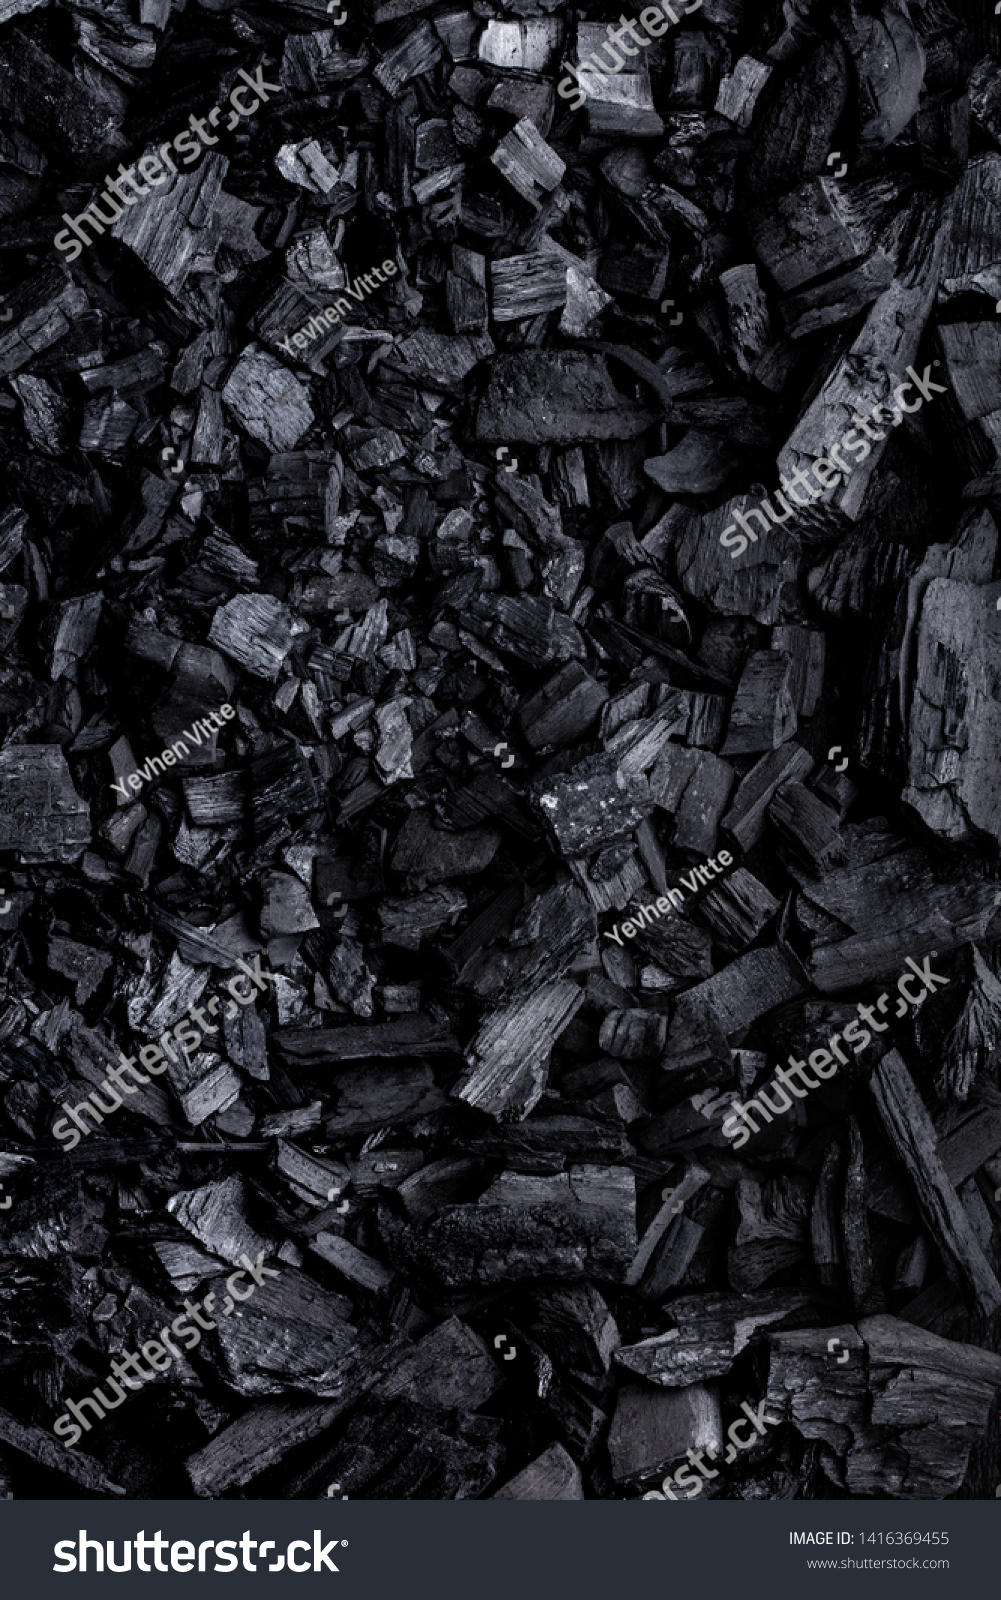 Flat lay of coal mineral black stones background. Coal pattern studio background #1416369455